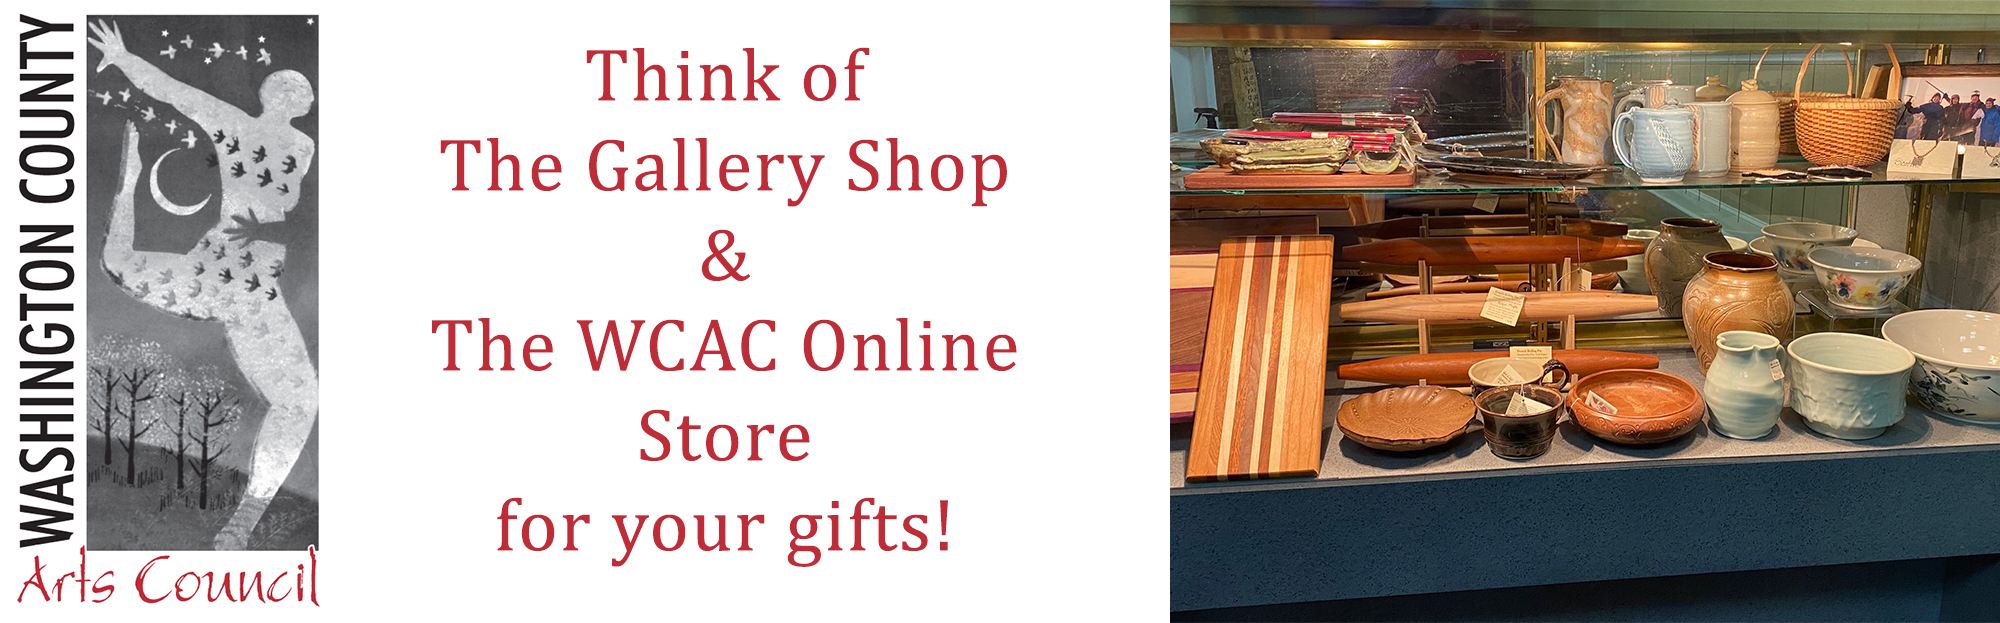 The Gallery Shop and WCAC Online Store